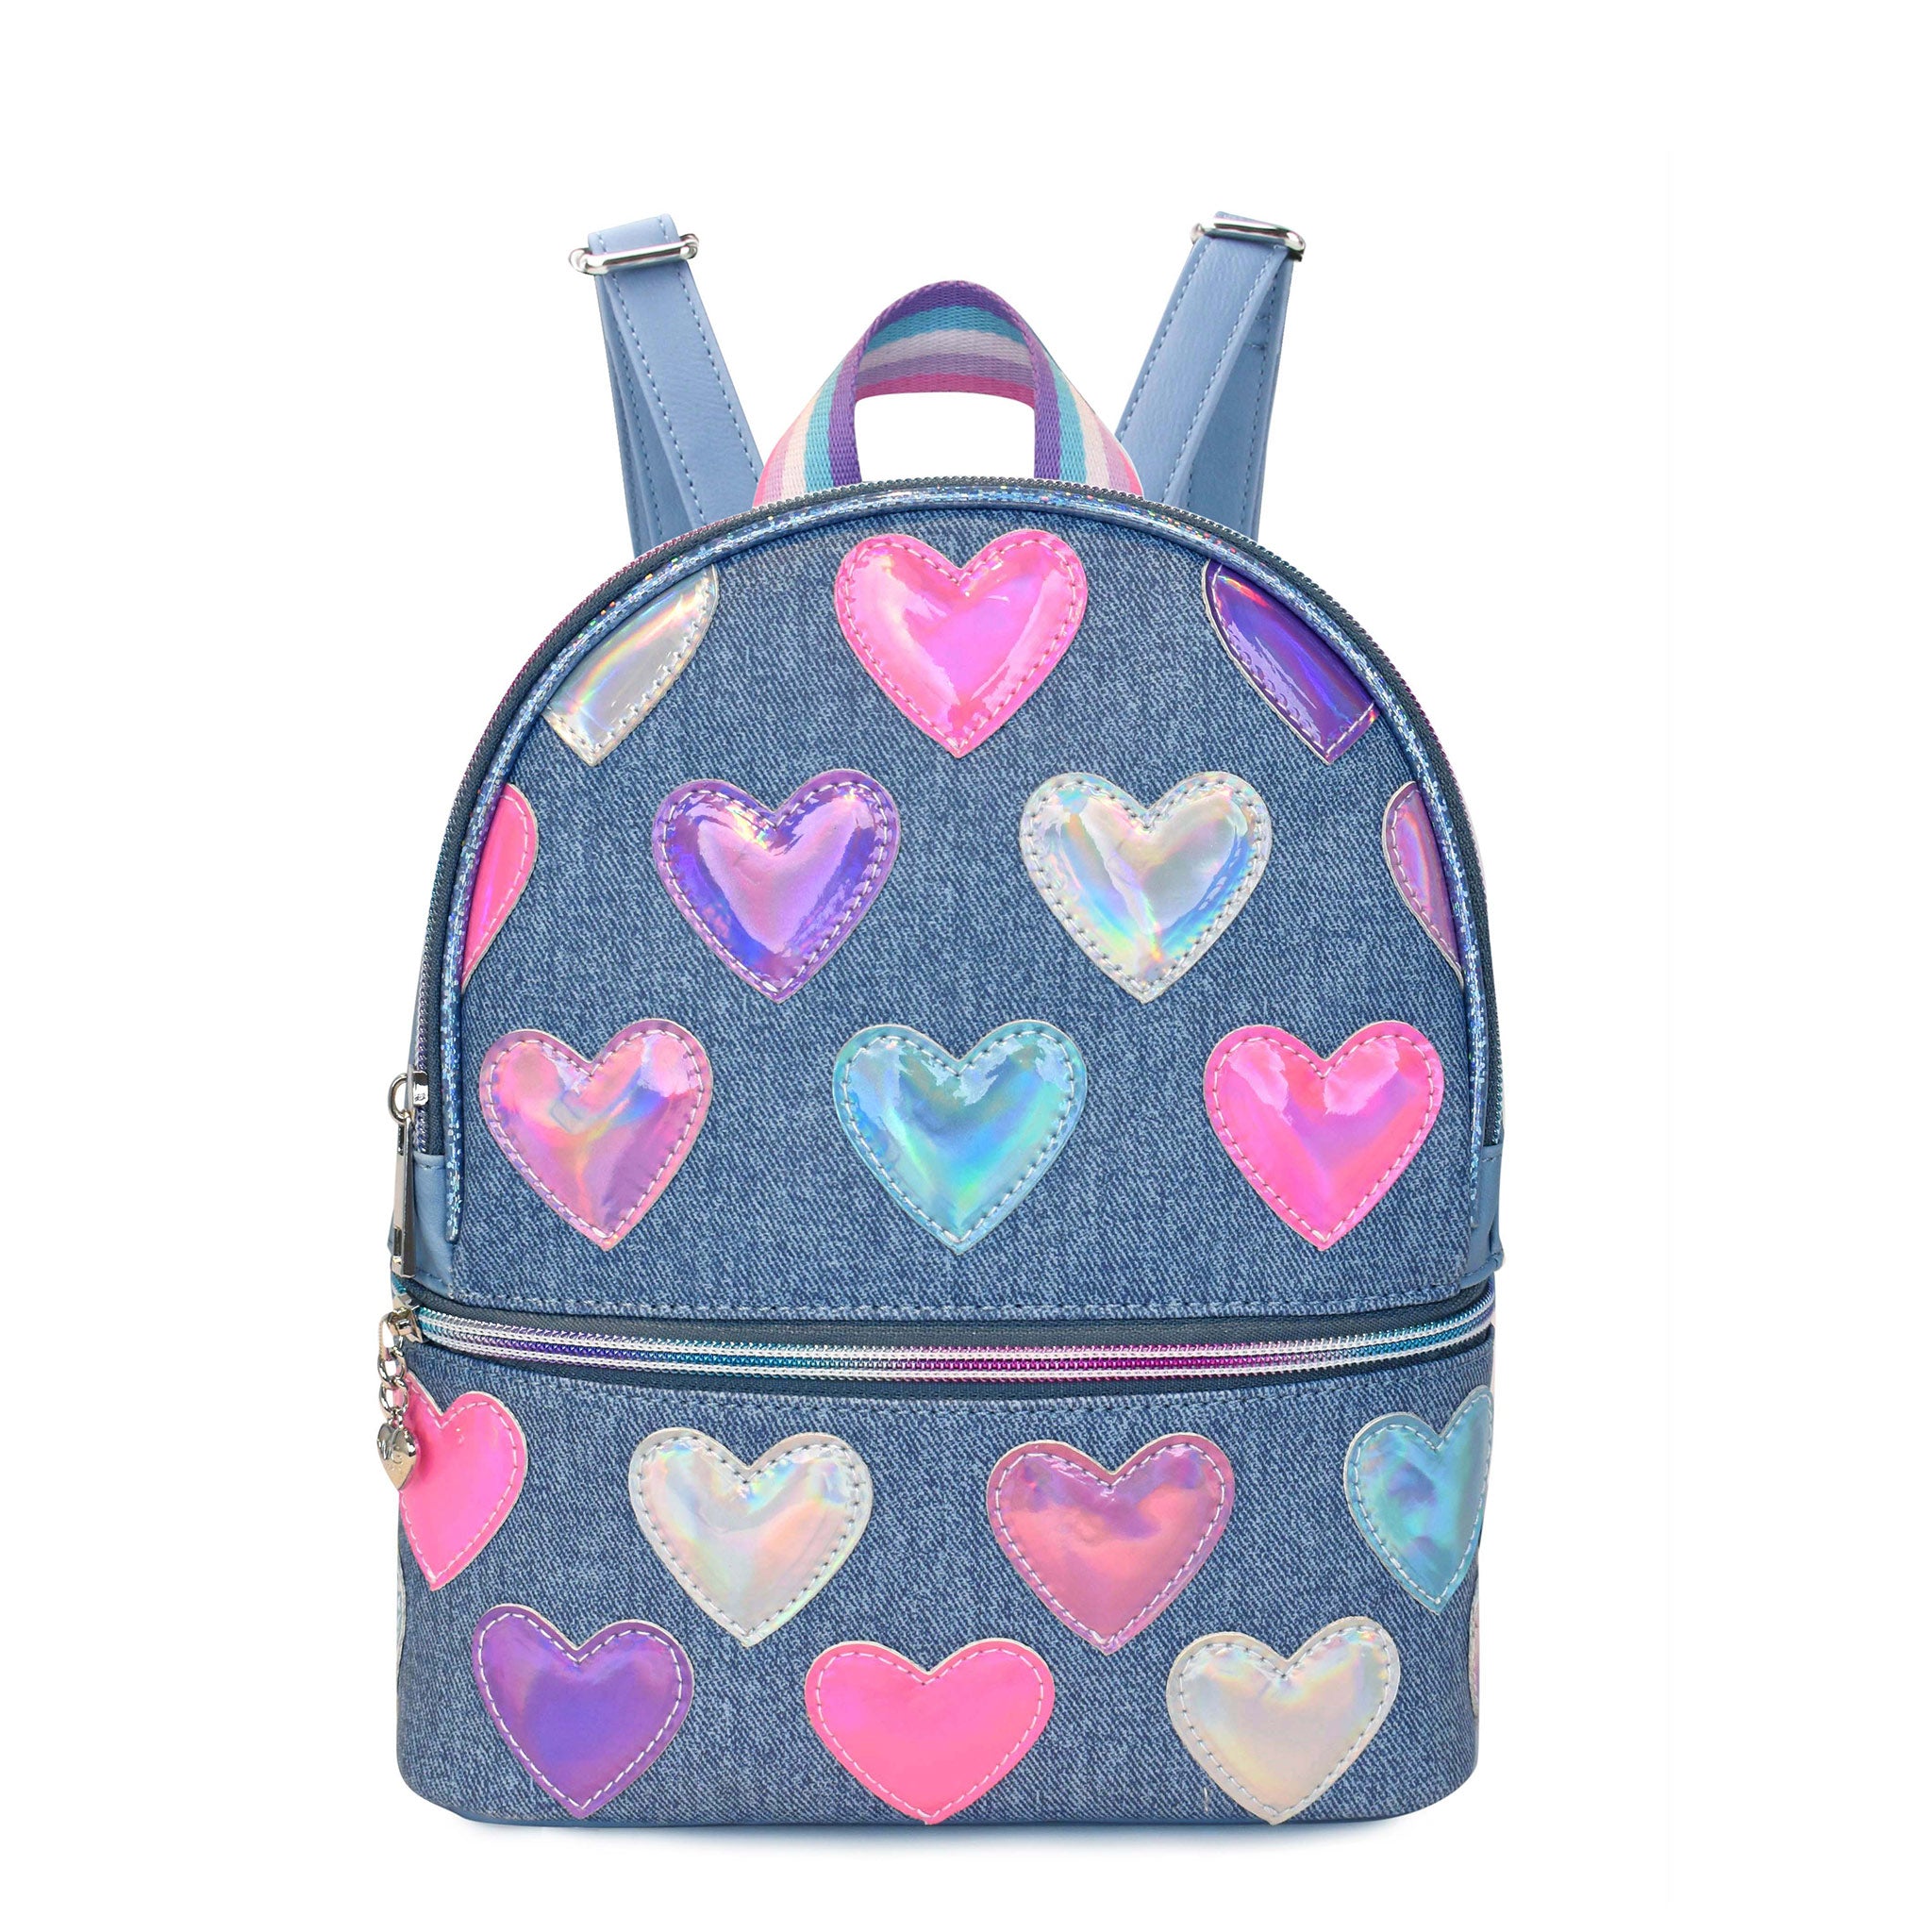 Front view of a denim mini backpack with metallic heart patches